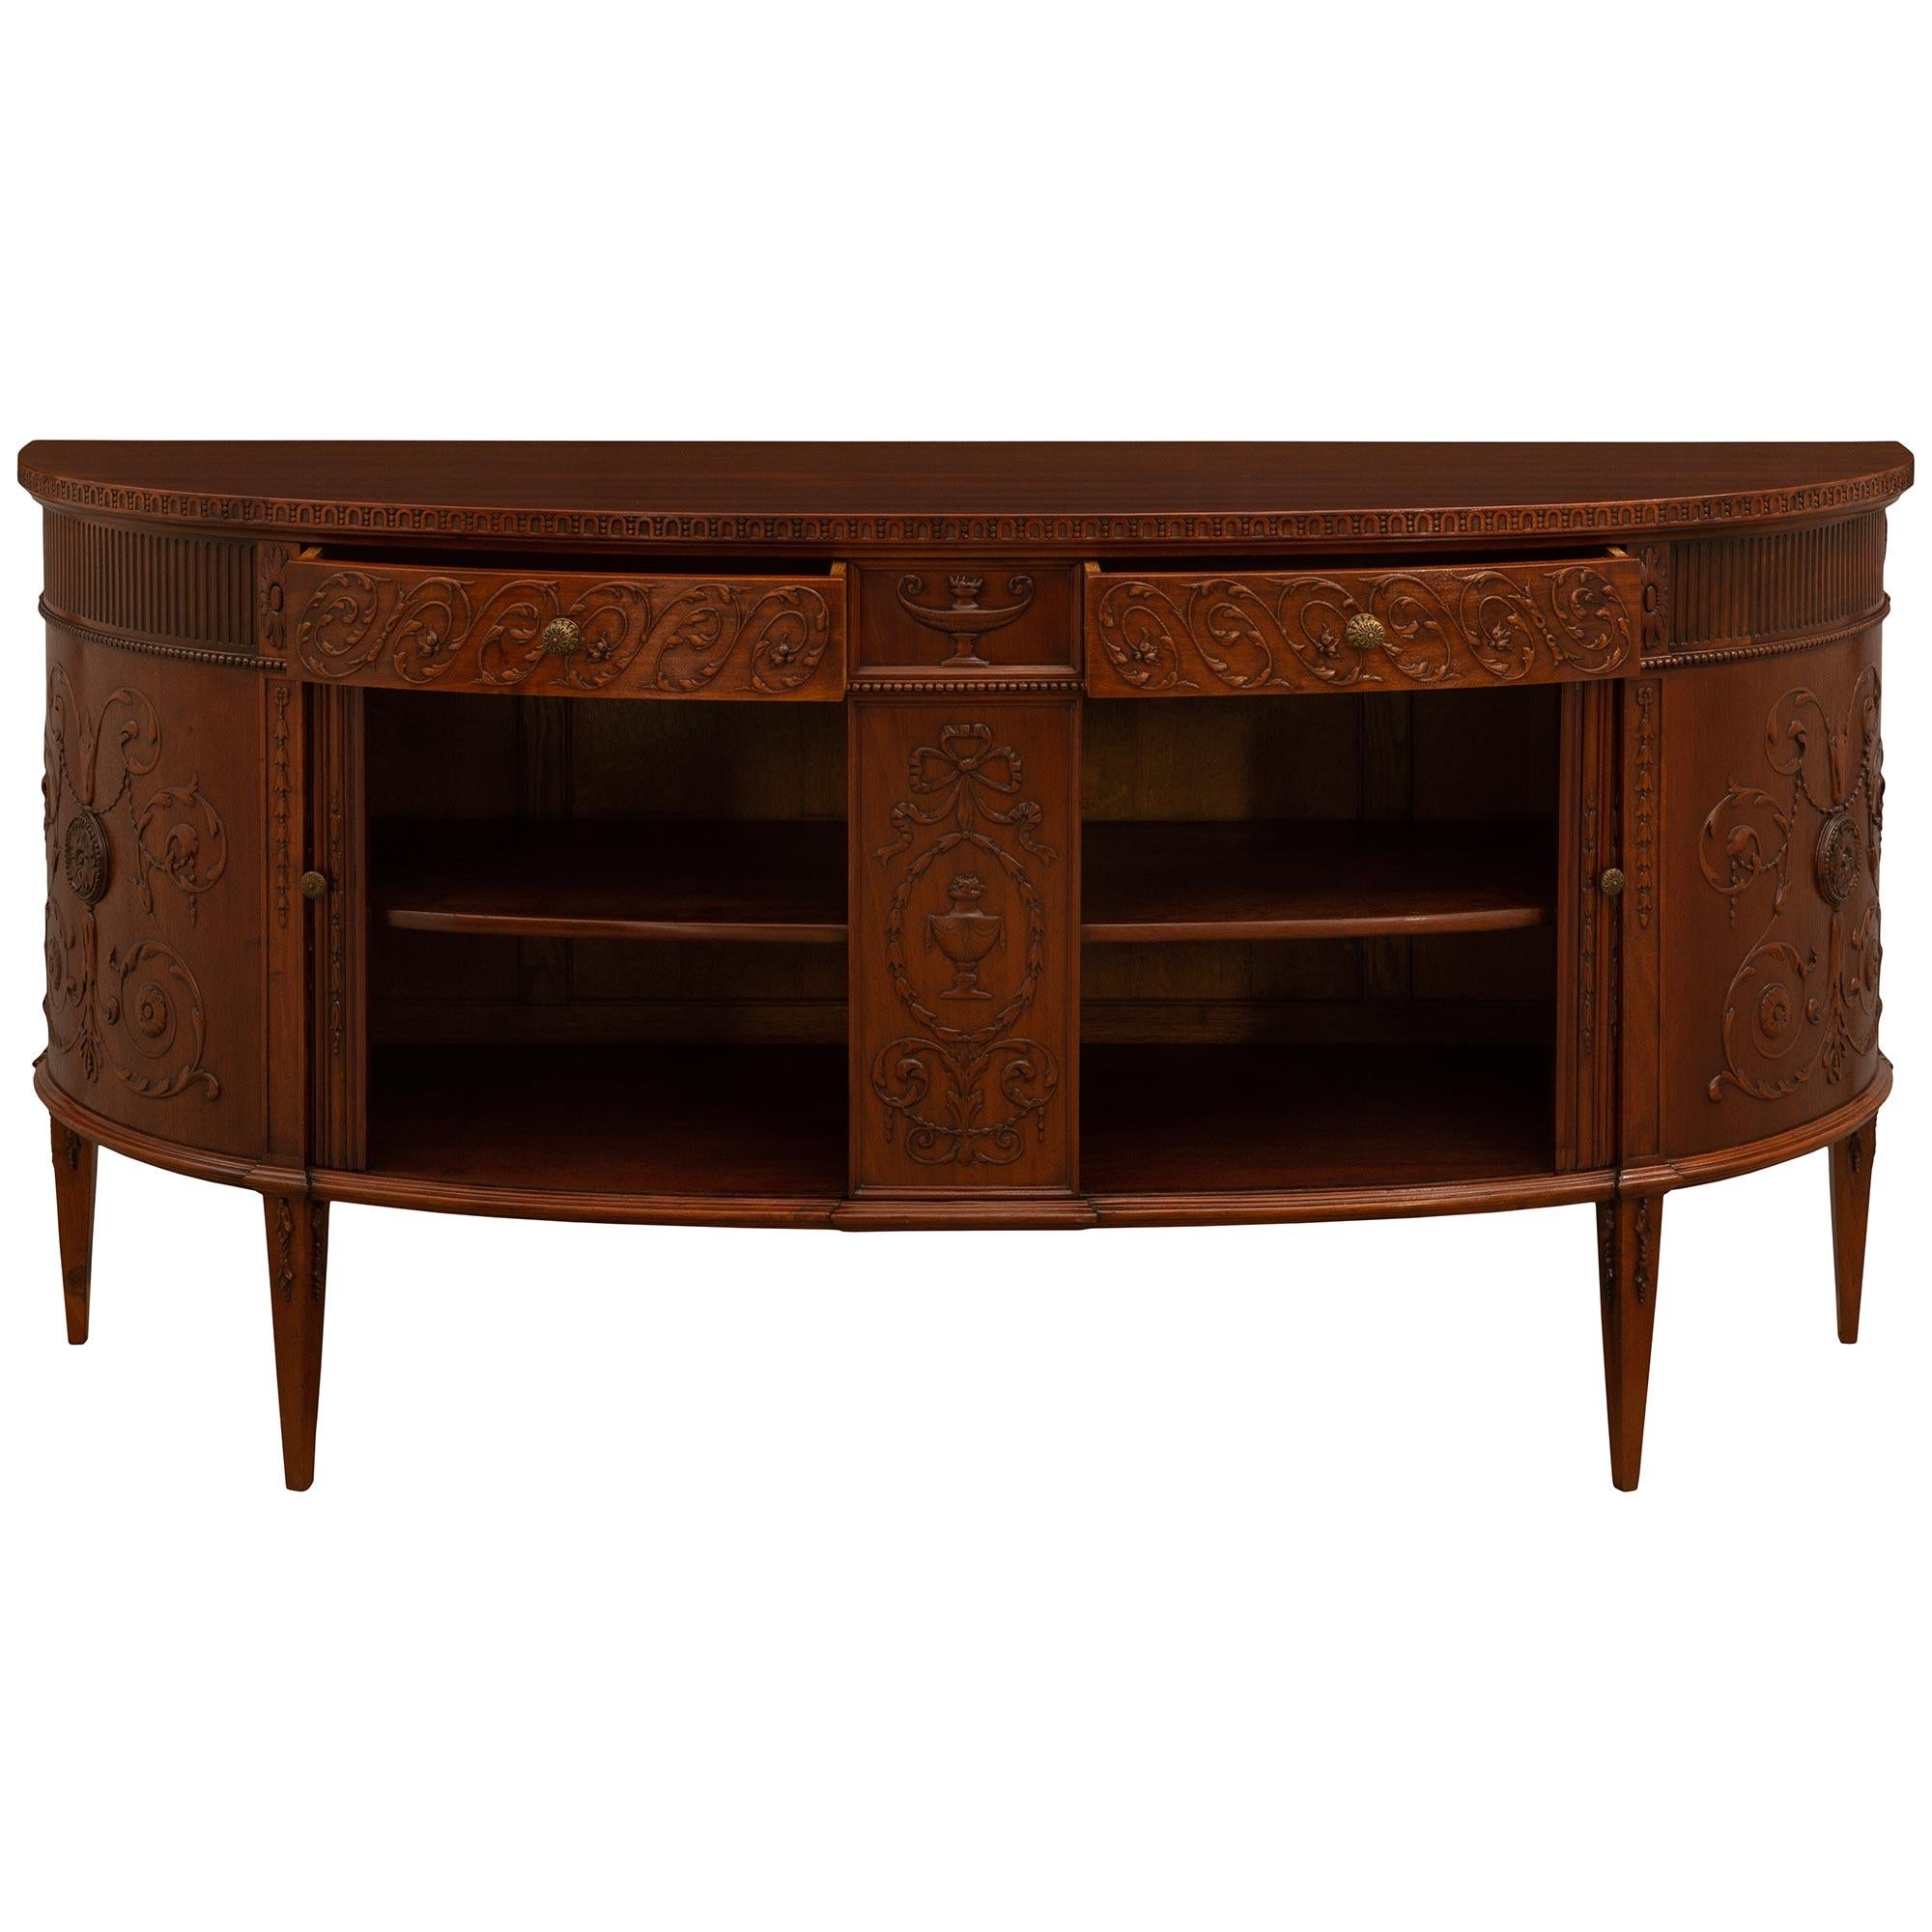 A wonderful and richly carved English 19th century Regency st. Mahogany buffet. The buffet is raised on four square tapered legs with floral top carvings. At the center is a finely carved urn on a recessed panel, framed within a tied ribbon and